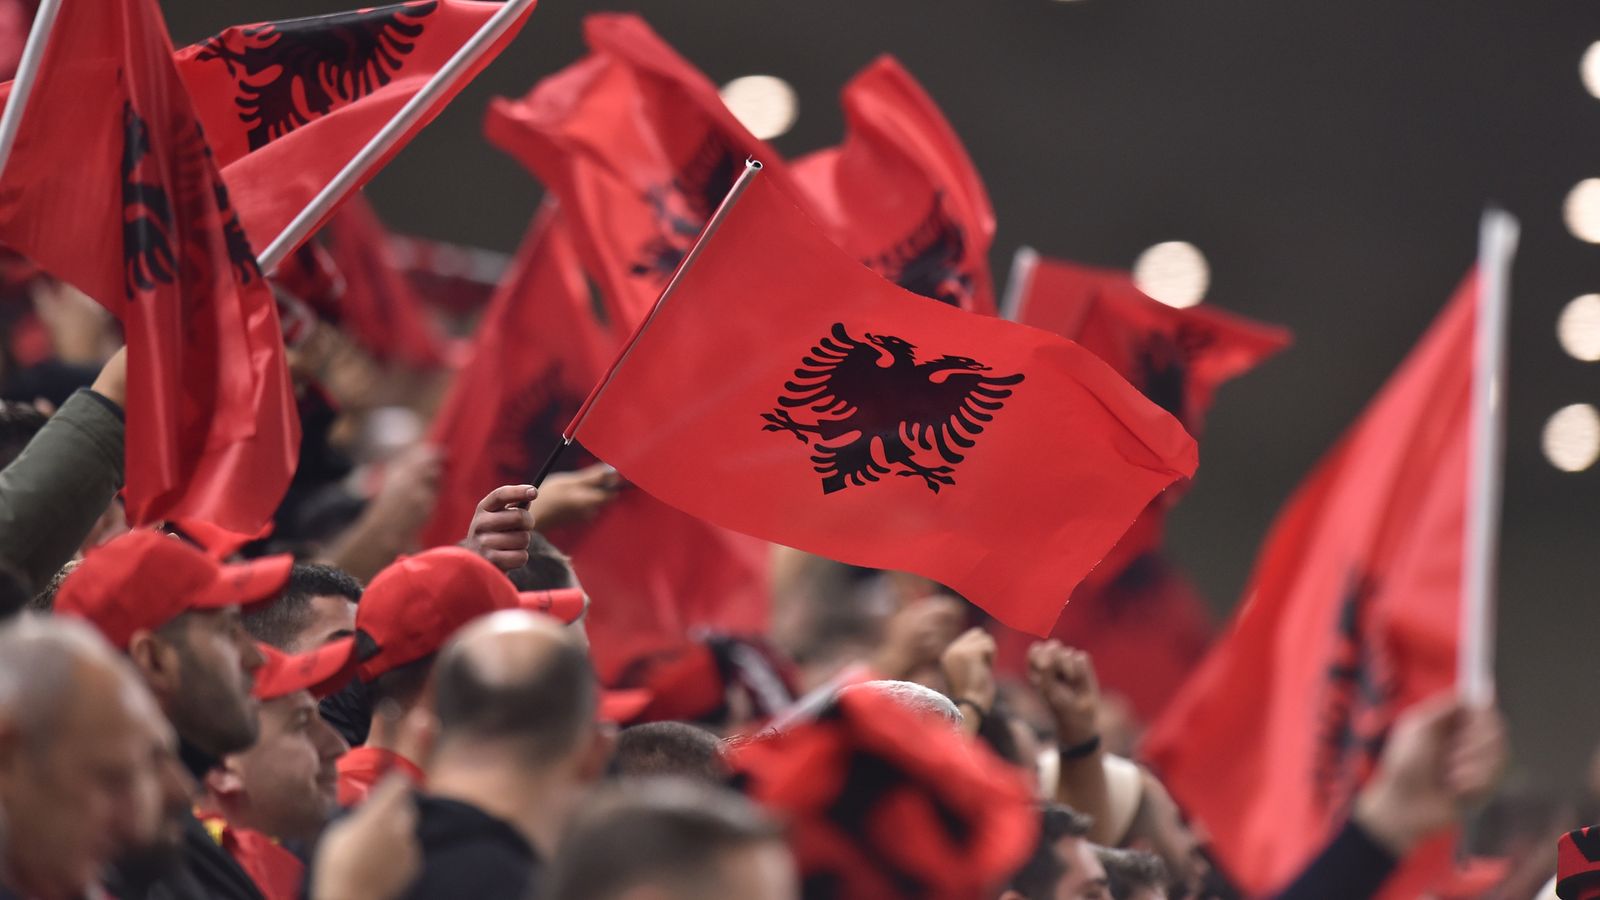 The AFL requests that the final of the Cup of Albania be played with fans 